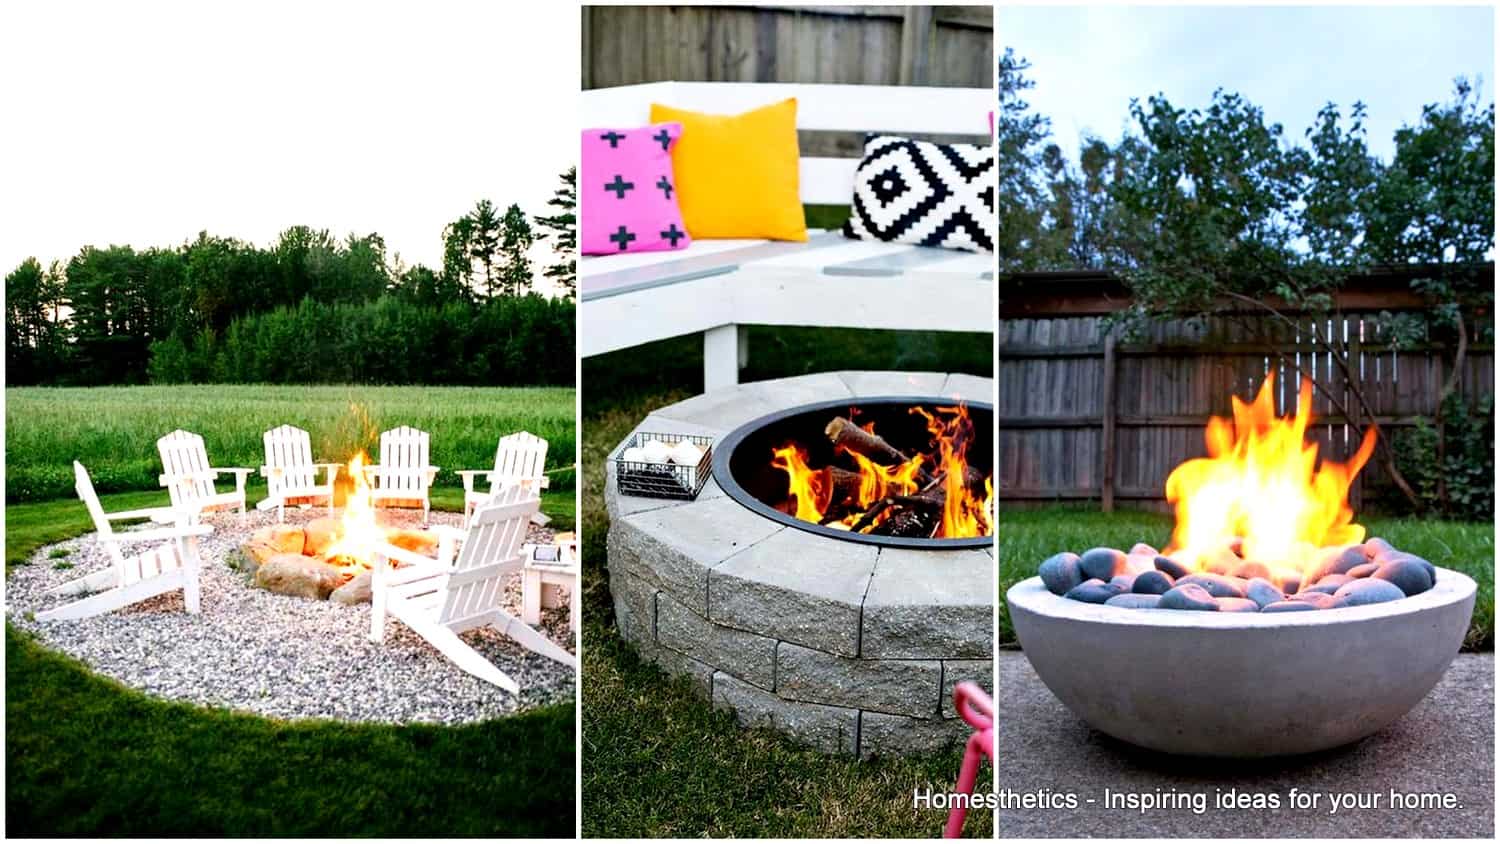 67 Brilliant DIY Fire Pit Plans amp Ideas to Build for Coziness and Warmth